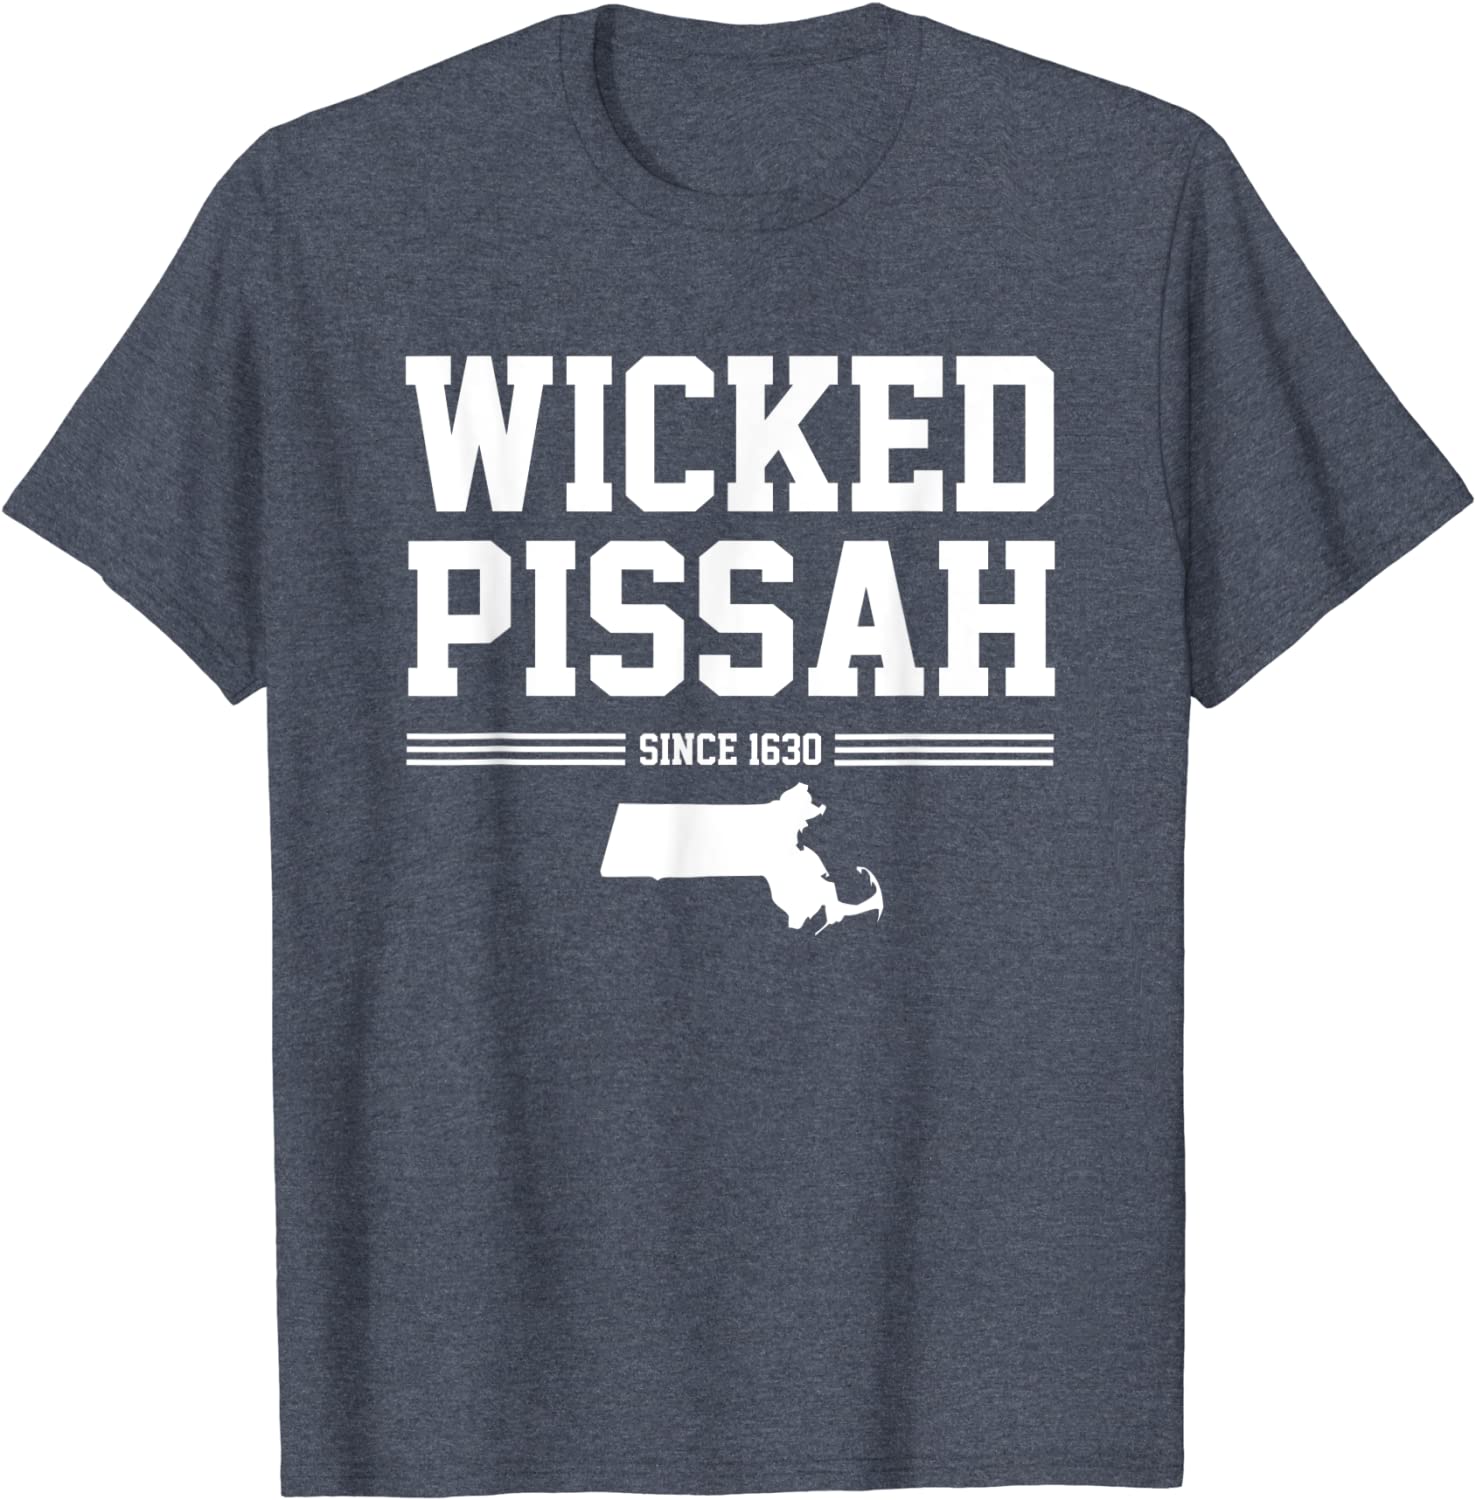 wicked pissah since 1630 t-shirt